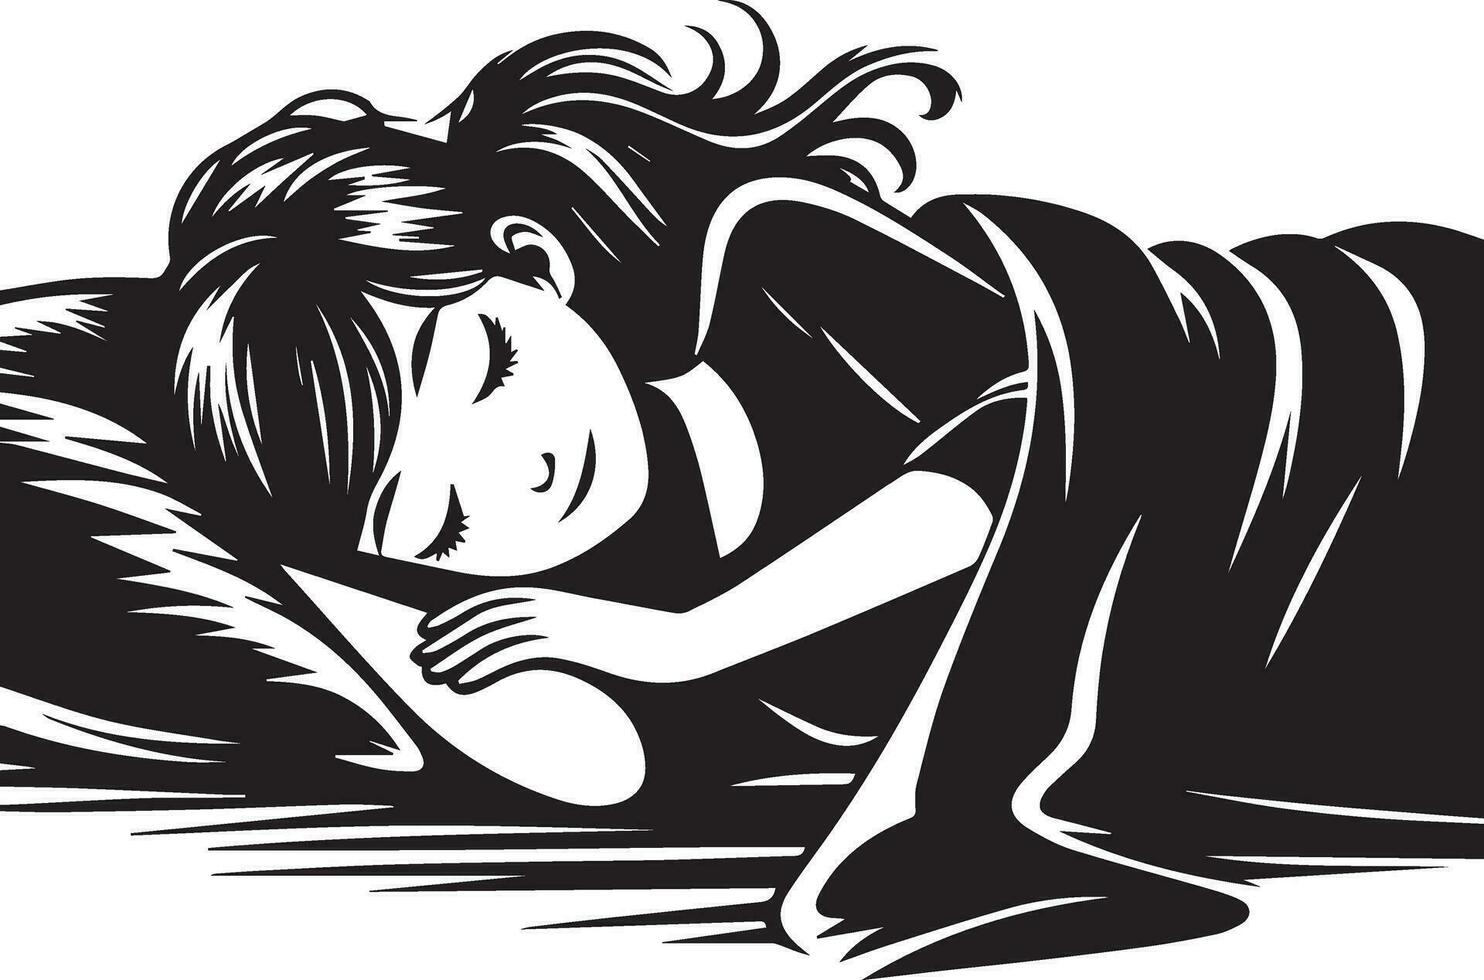 A girl sleeping on the bed vector silhouette